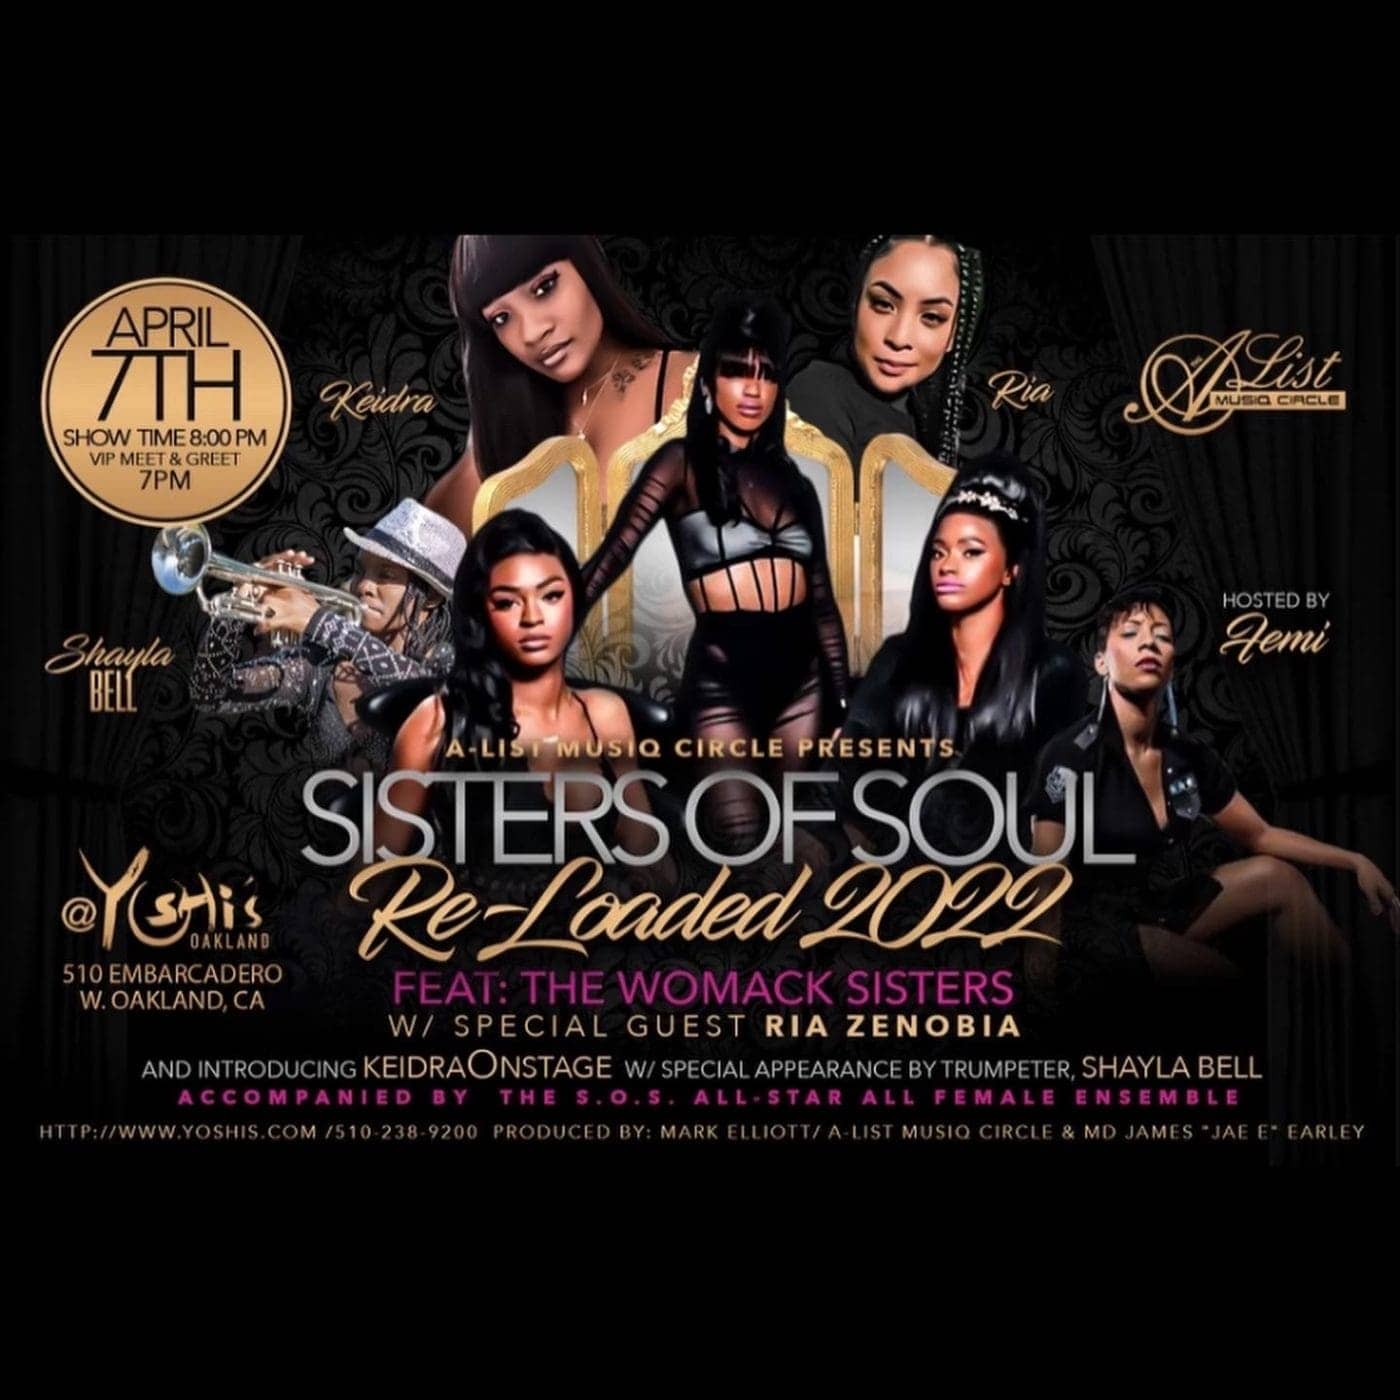 Sisters-of-Soul-Yoshis-flier-1400x1400, Local R&B artist Keidra Onstage is set to rock the stage of the prestigious jazz club Yoshi’s in April, Culture Currents 